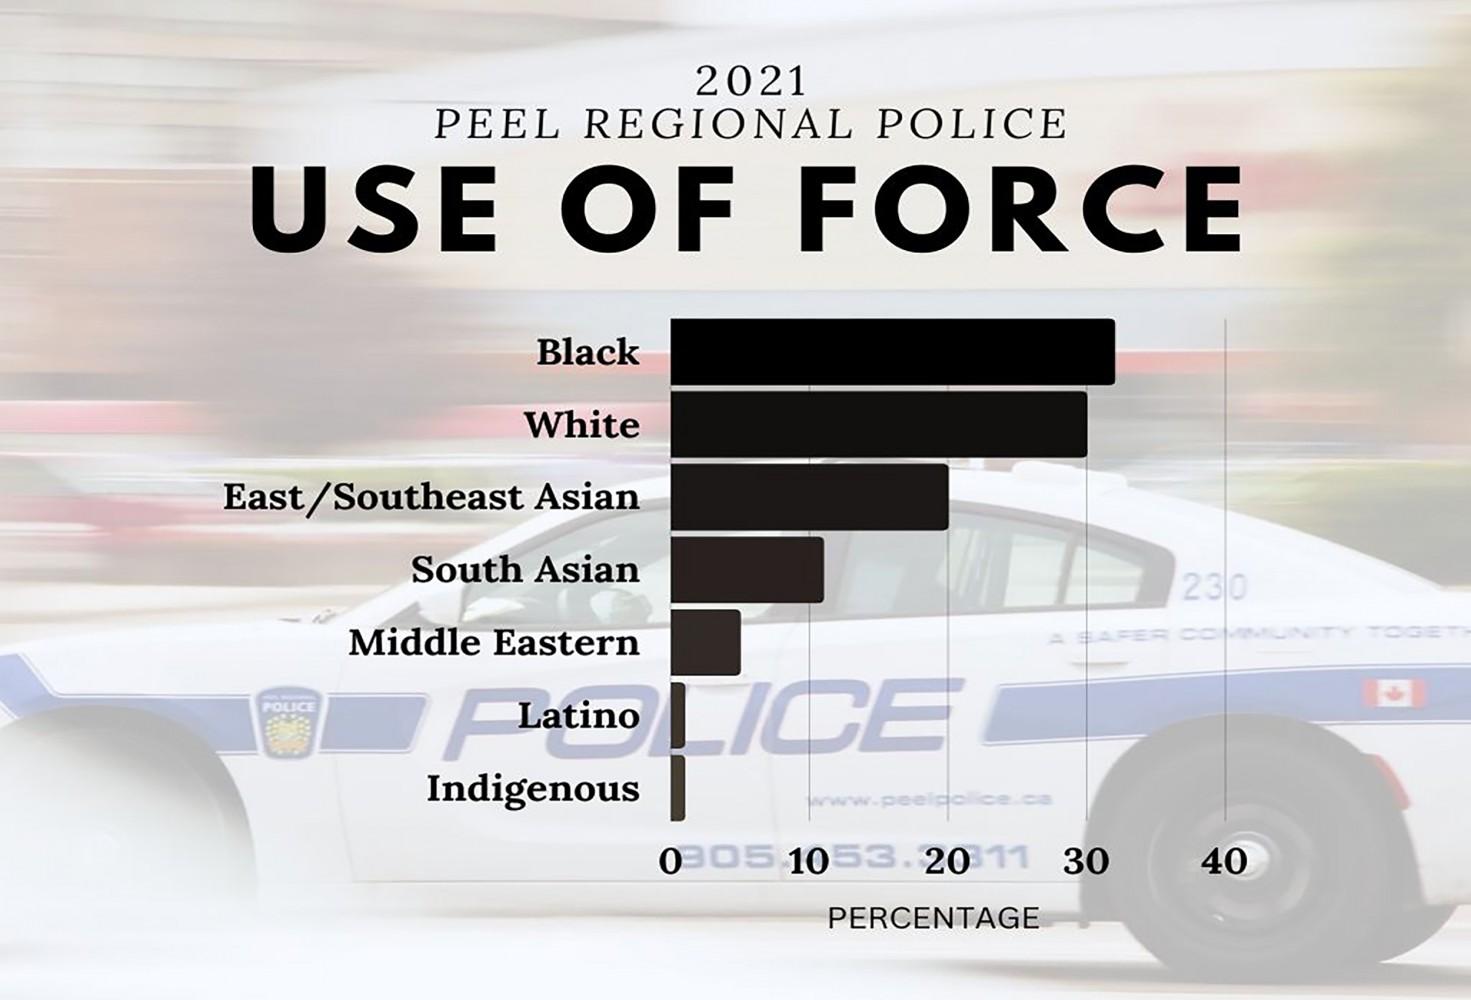 Black candidates demand increased accountability for Peel police around use of force against Black residents